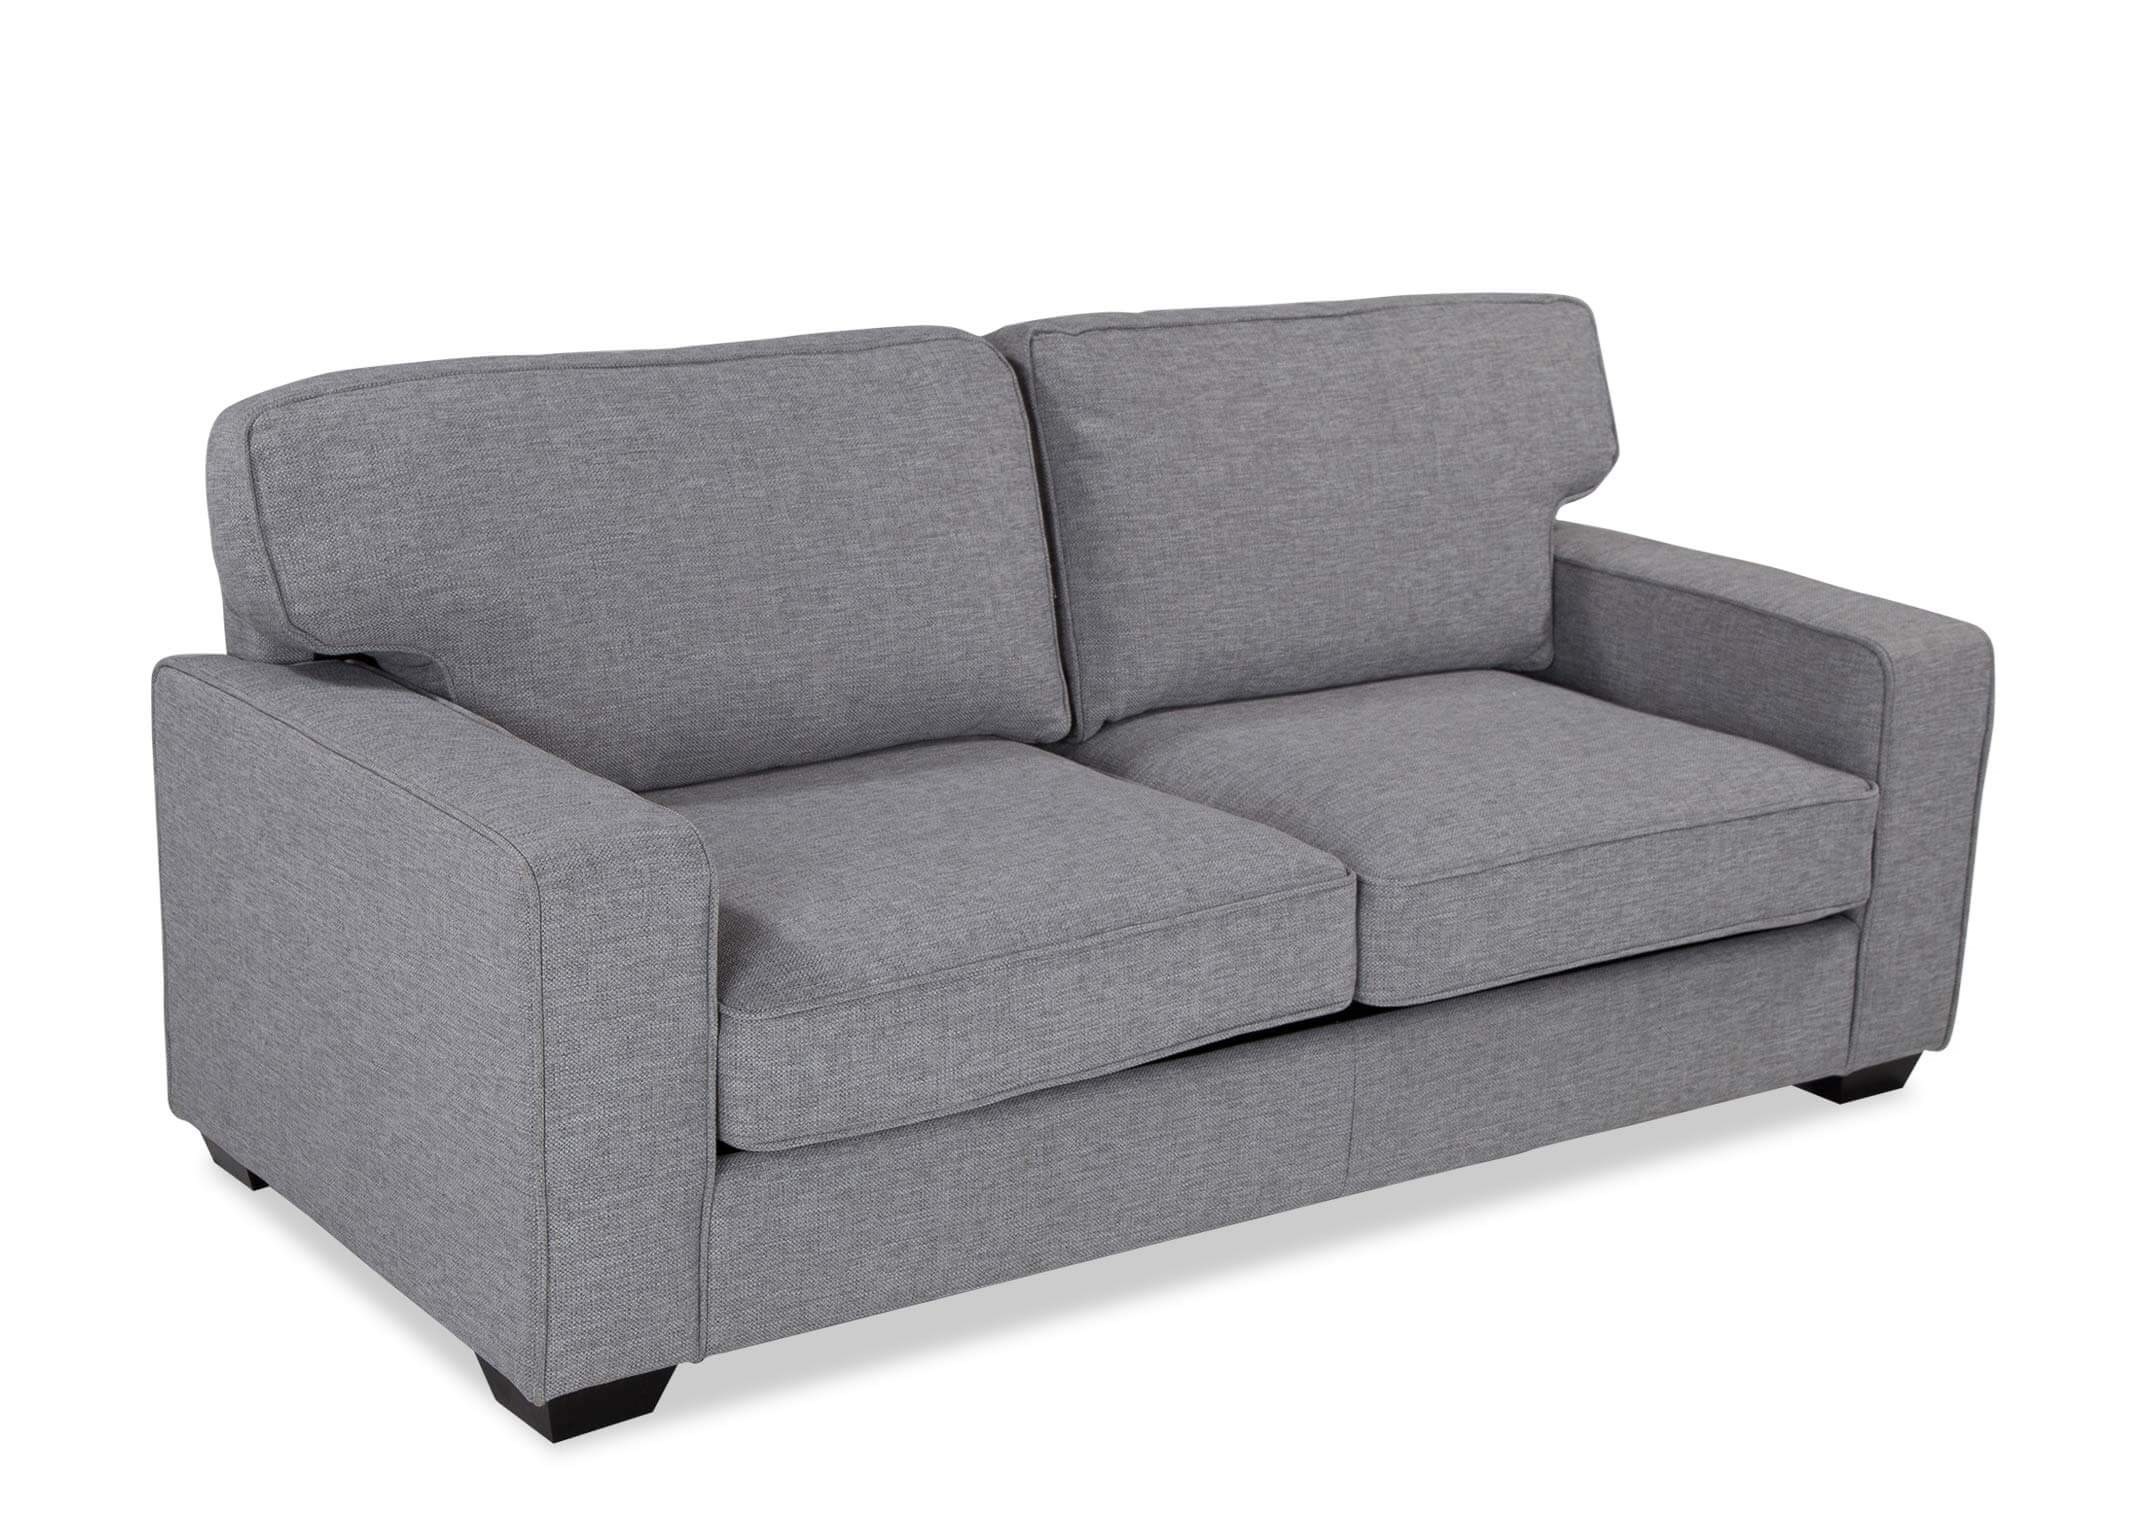 124188 1 Grey Sofabed Nevada Power Shot ?store=default&image Type=small Image&auto=webp&format=pjpg&width=200&height=250&fit=cover